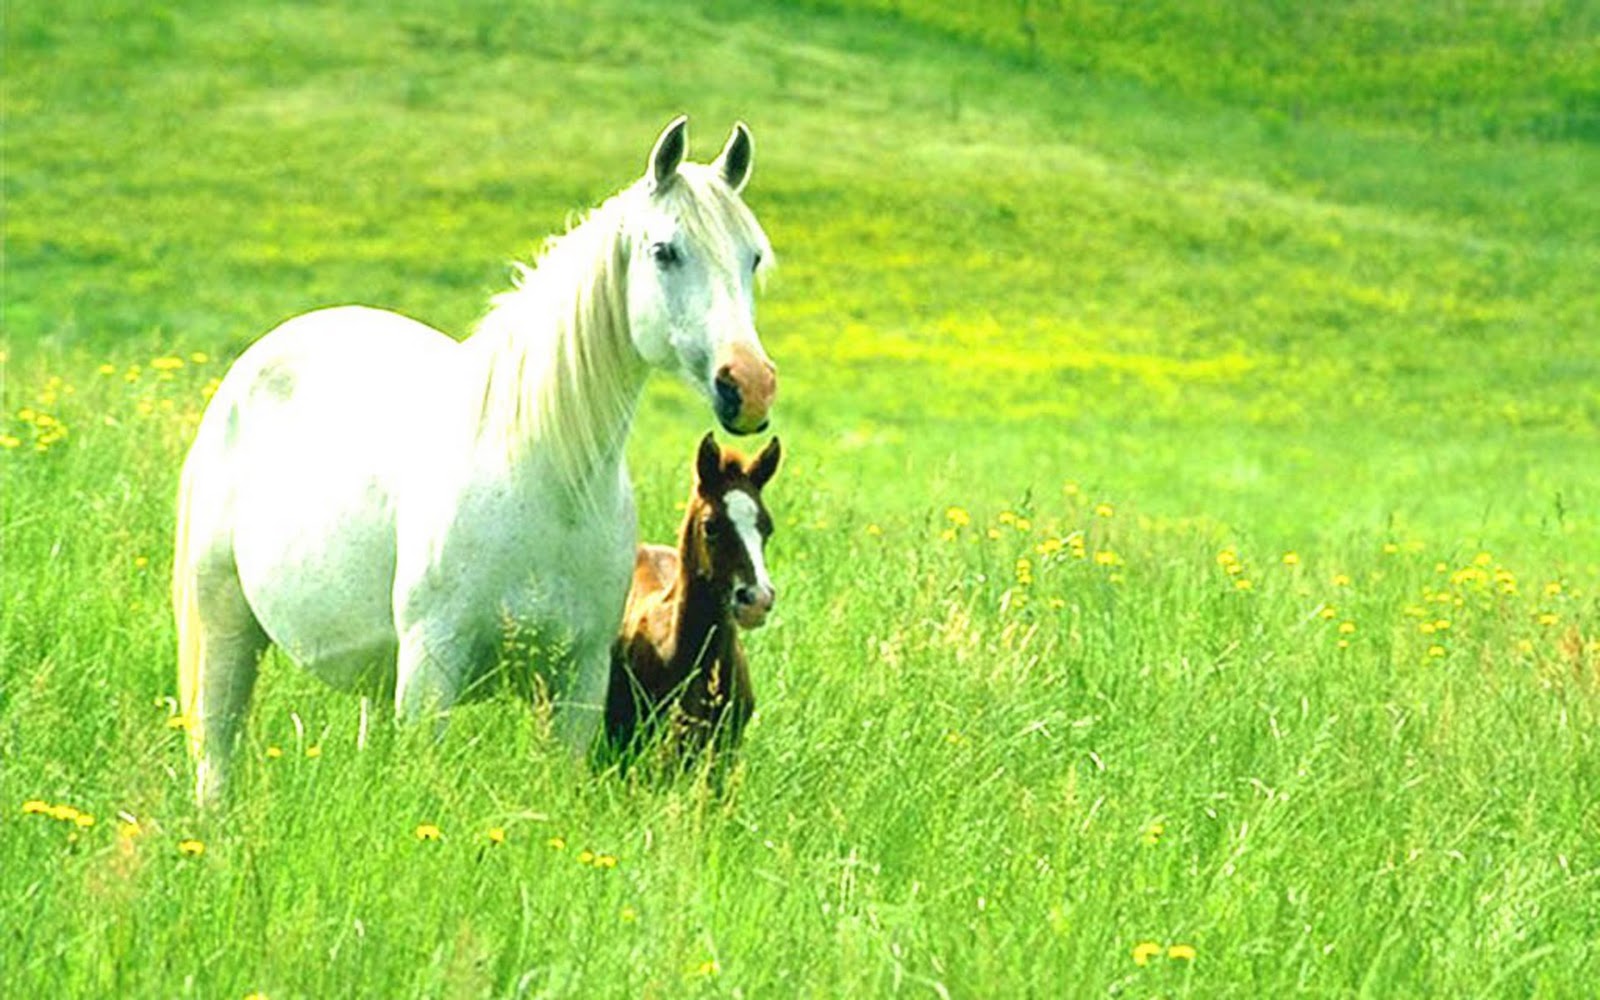 Beauty Full Horse Wallpaper And Animal